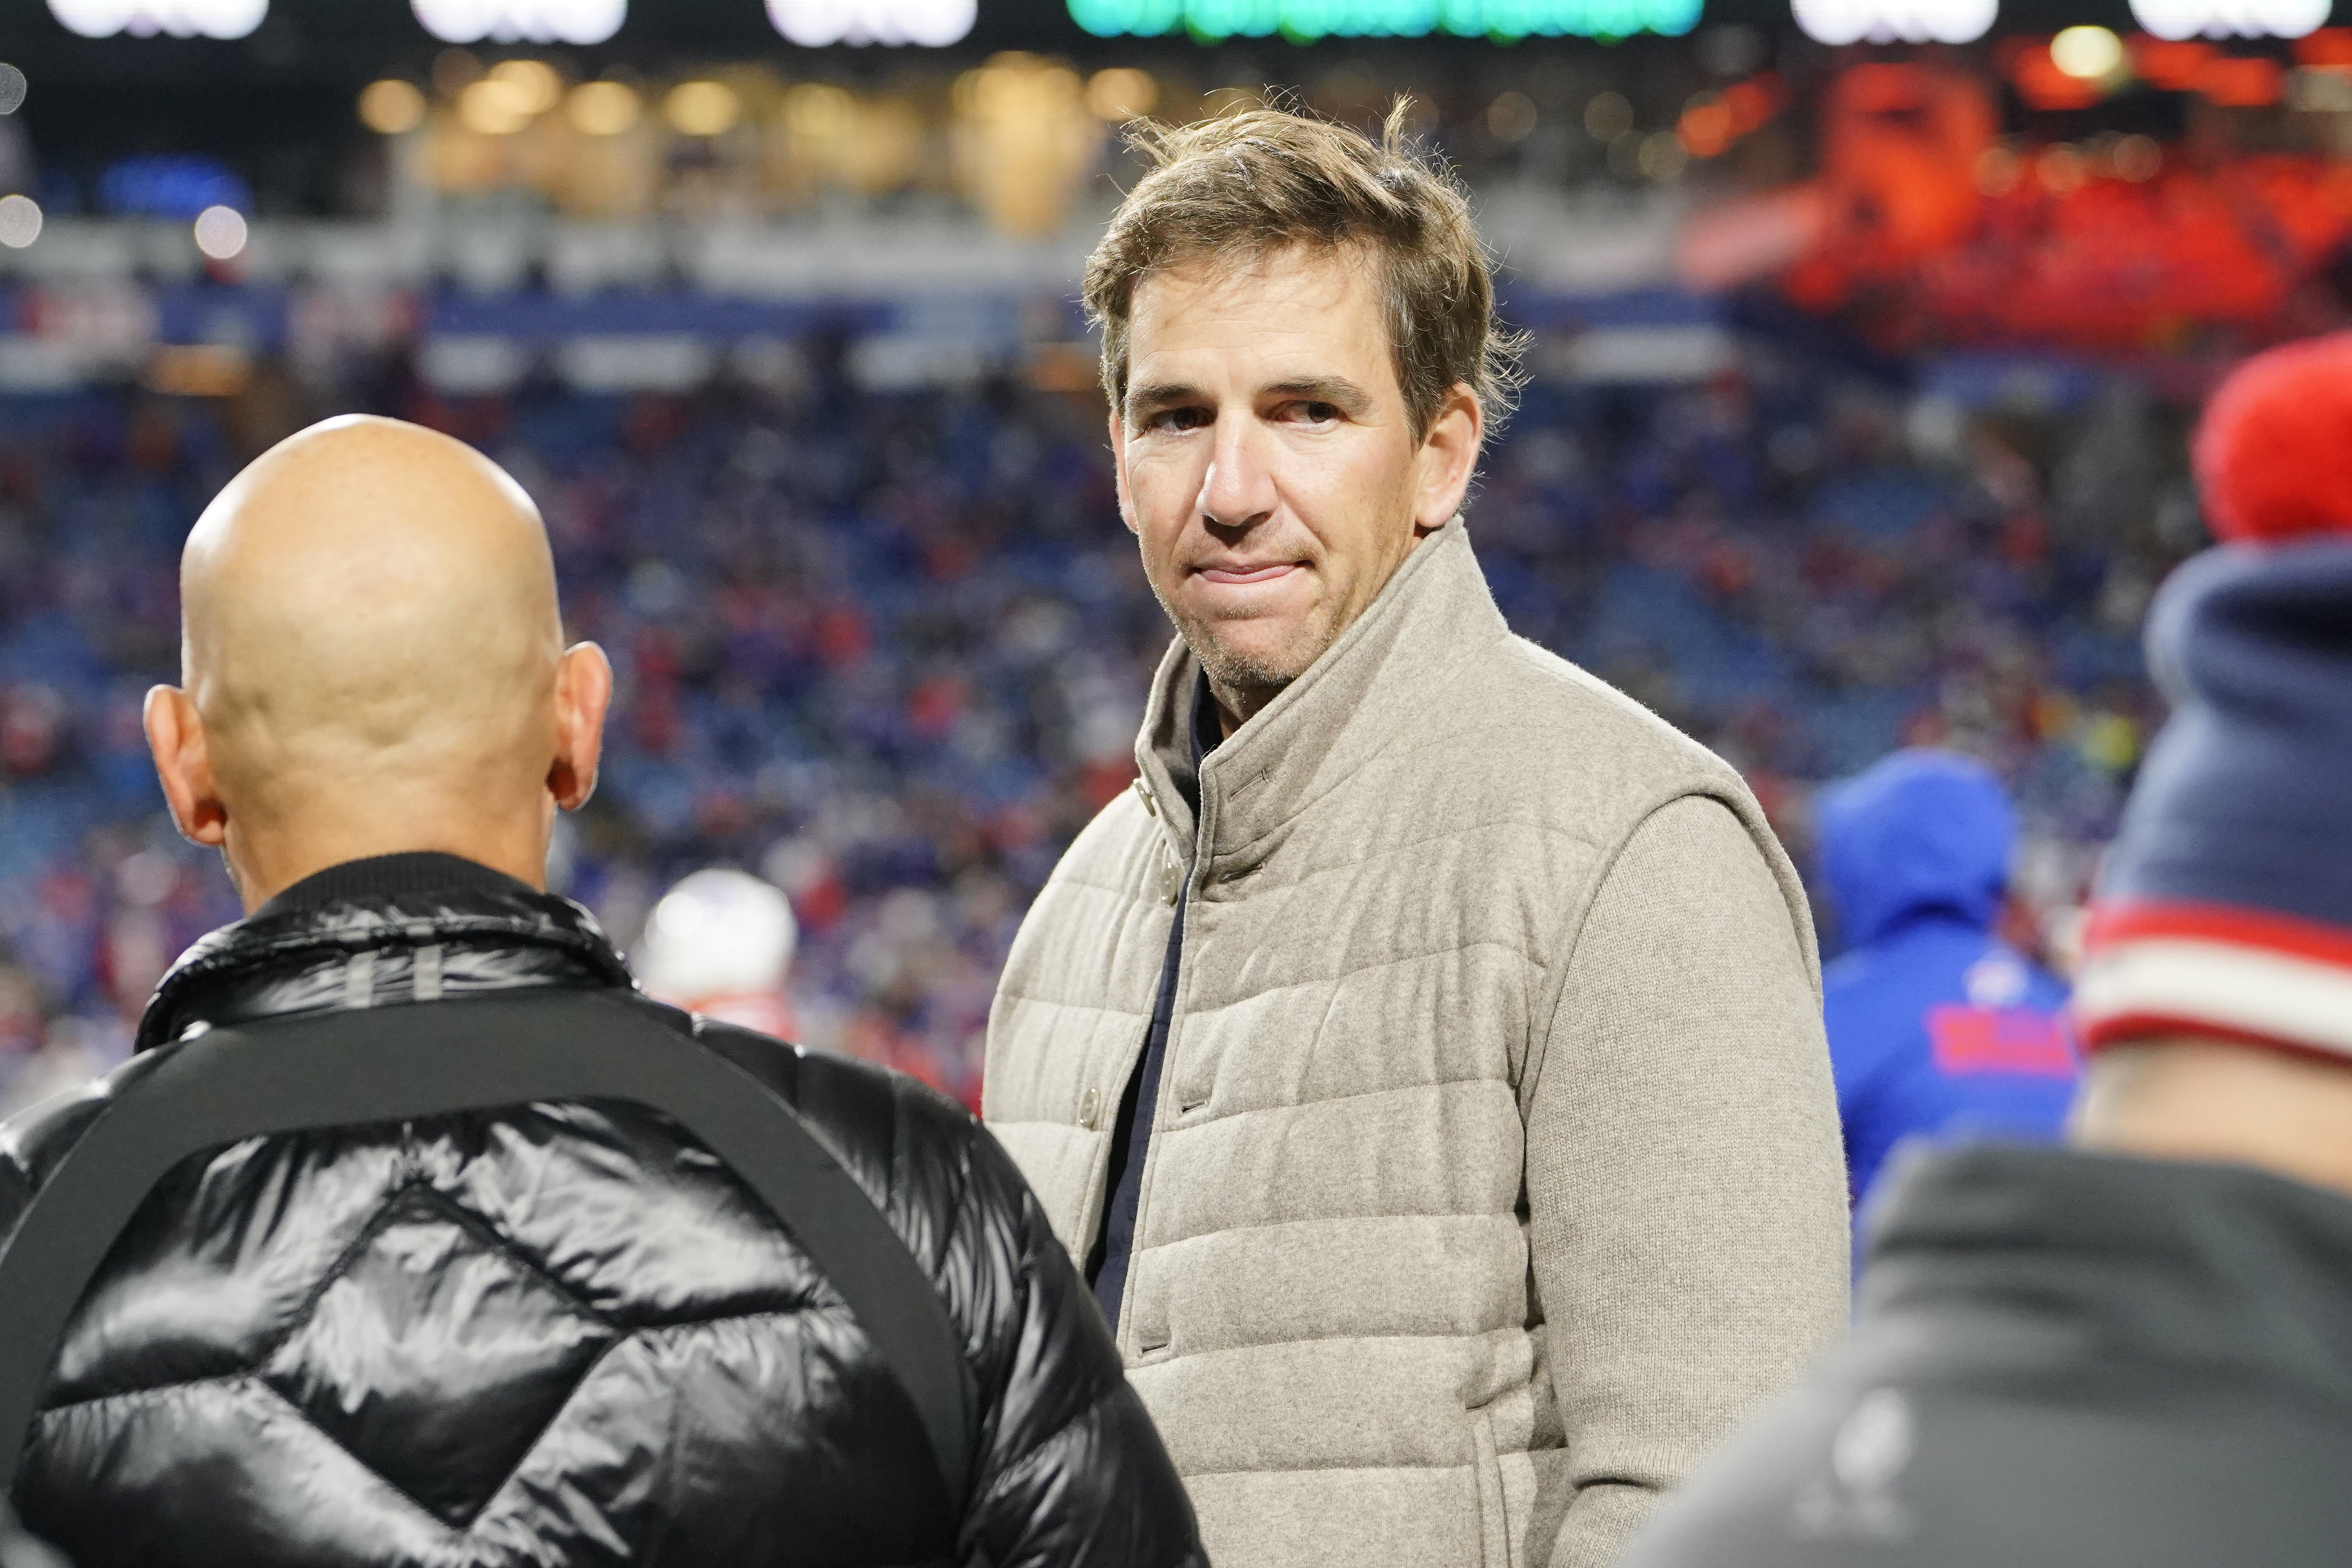 Former New York Giants quarterback Eli Manning prior to the game against the Buffalo Bills during the first half at Highmark Stadium